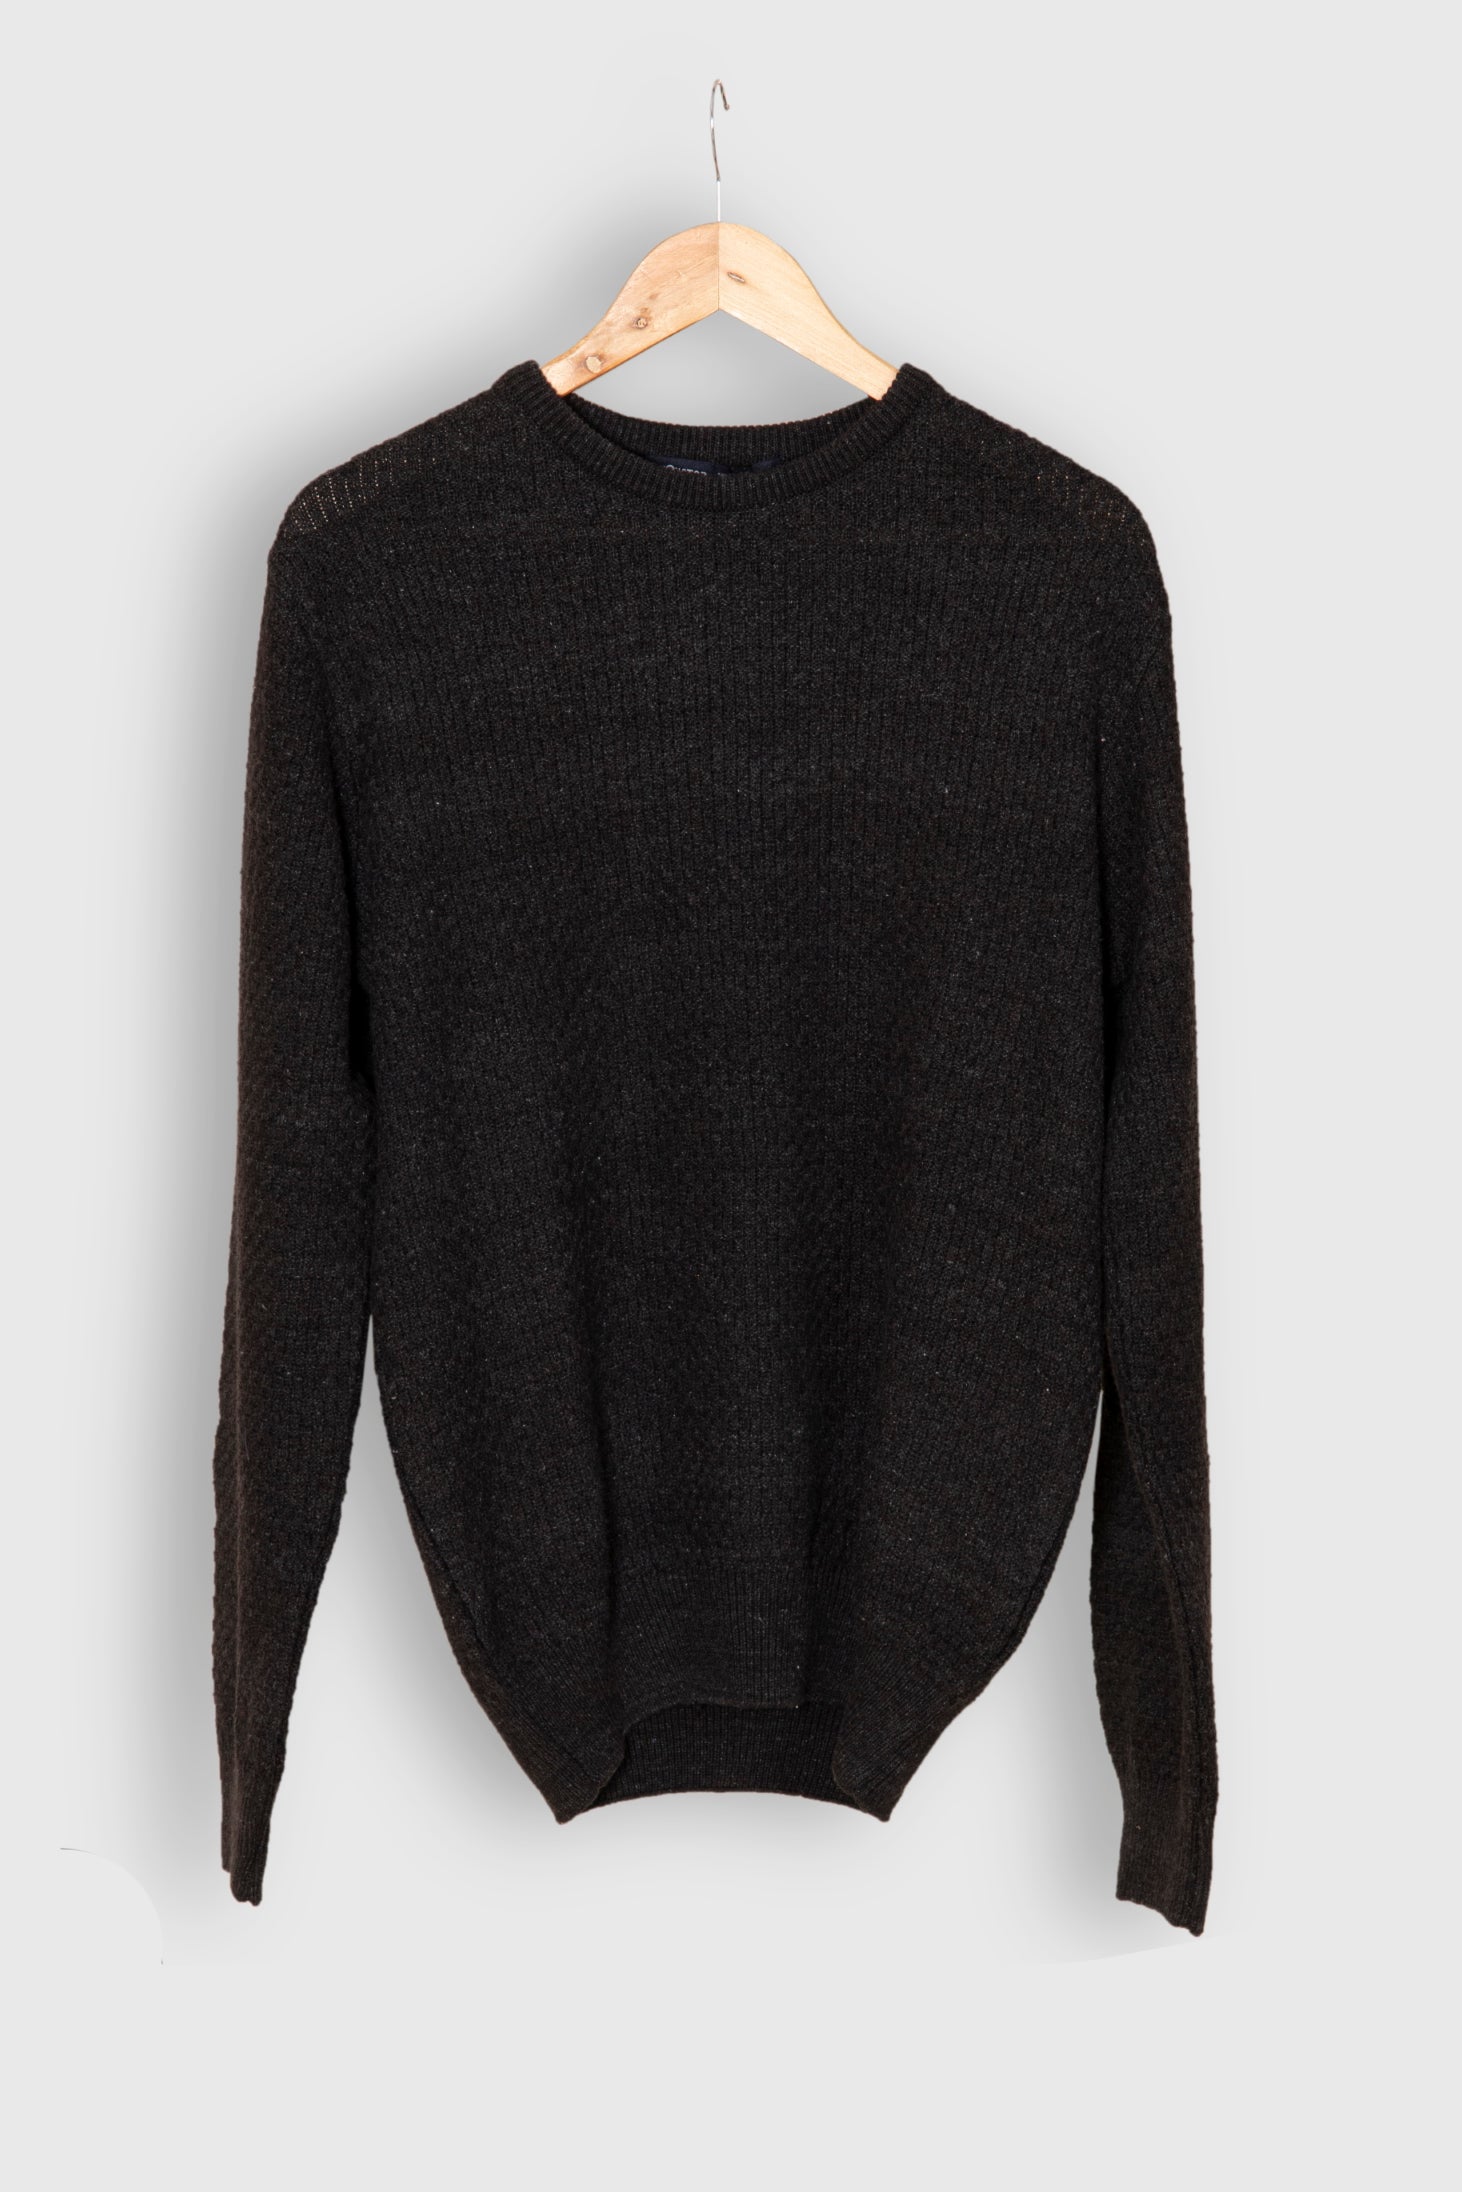 Down Knit Sweater